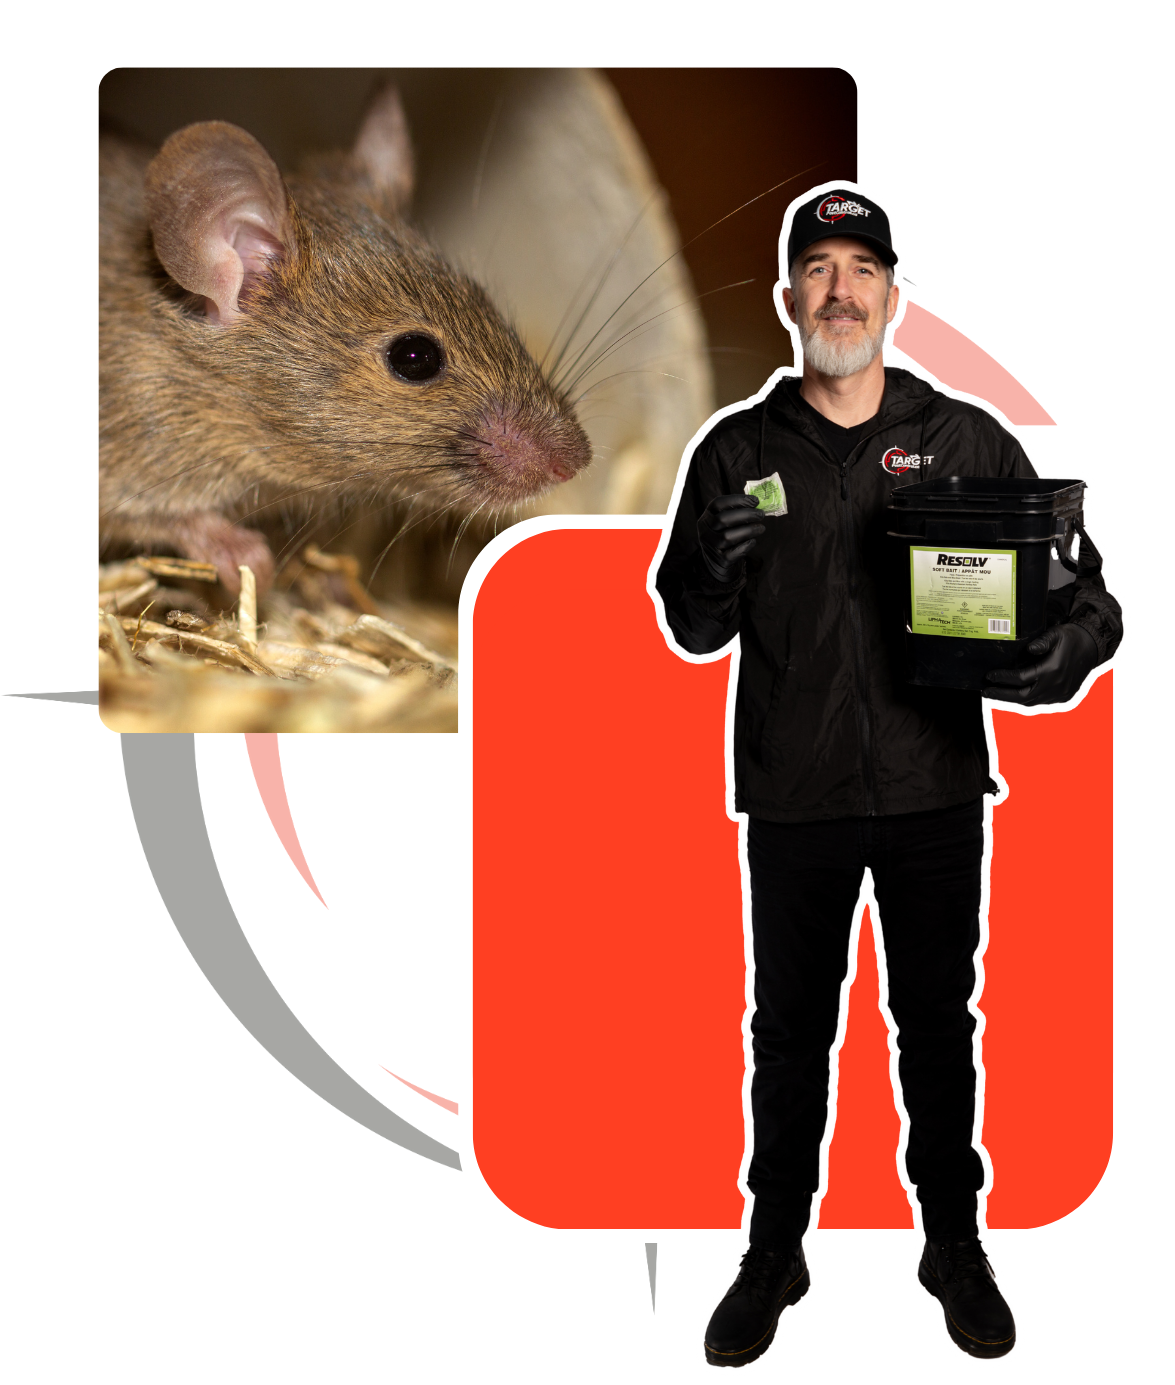 A man in a black hat is kneeling down next to a box with mouse bait in it.